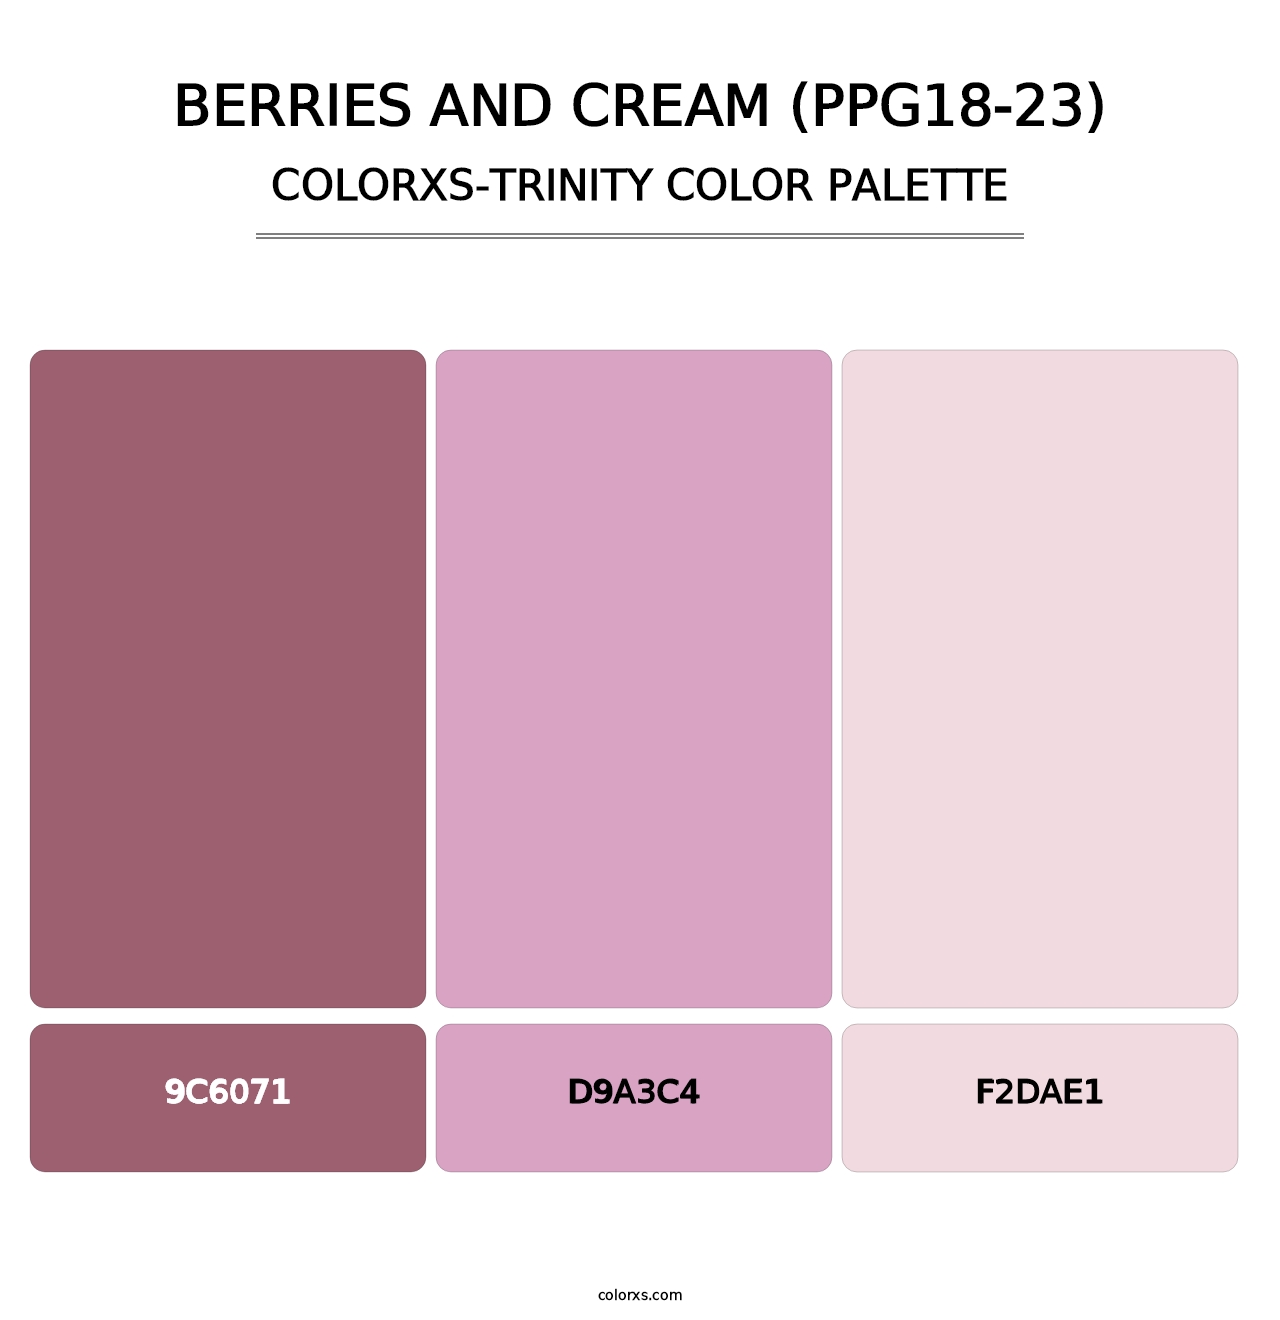 Berries And Cream (PPG18-23) - Colorxs Trinity Palette